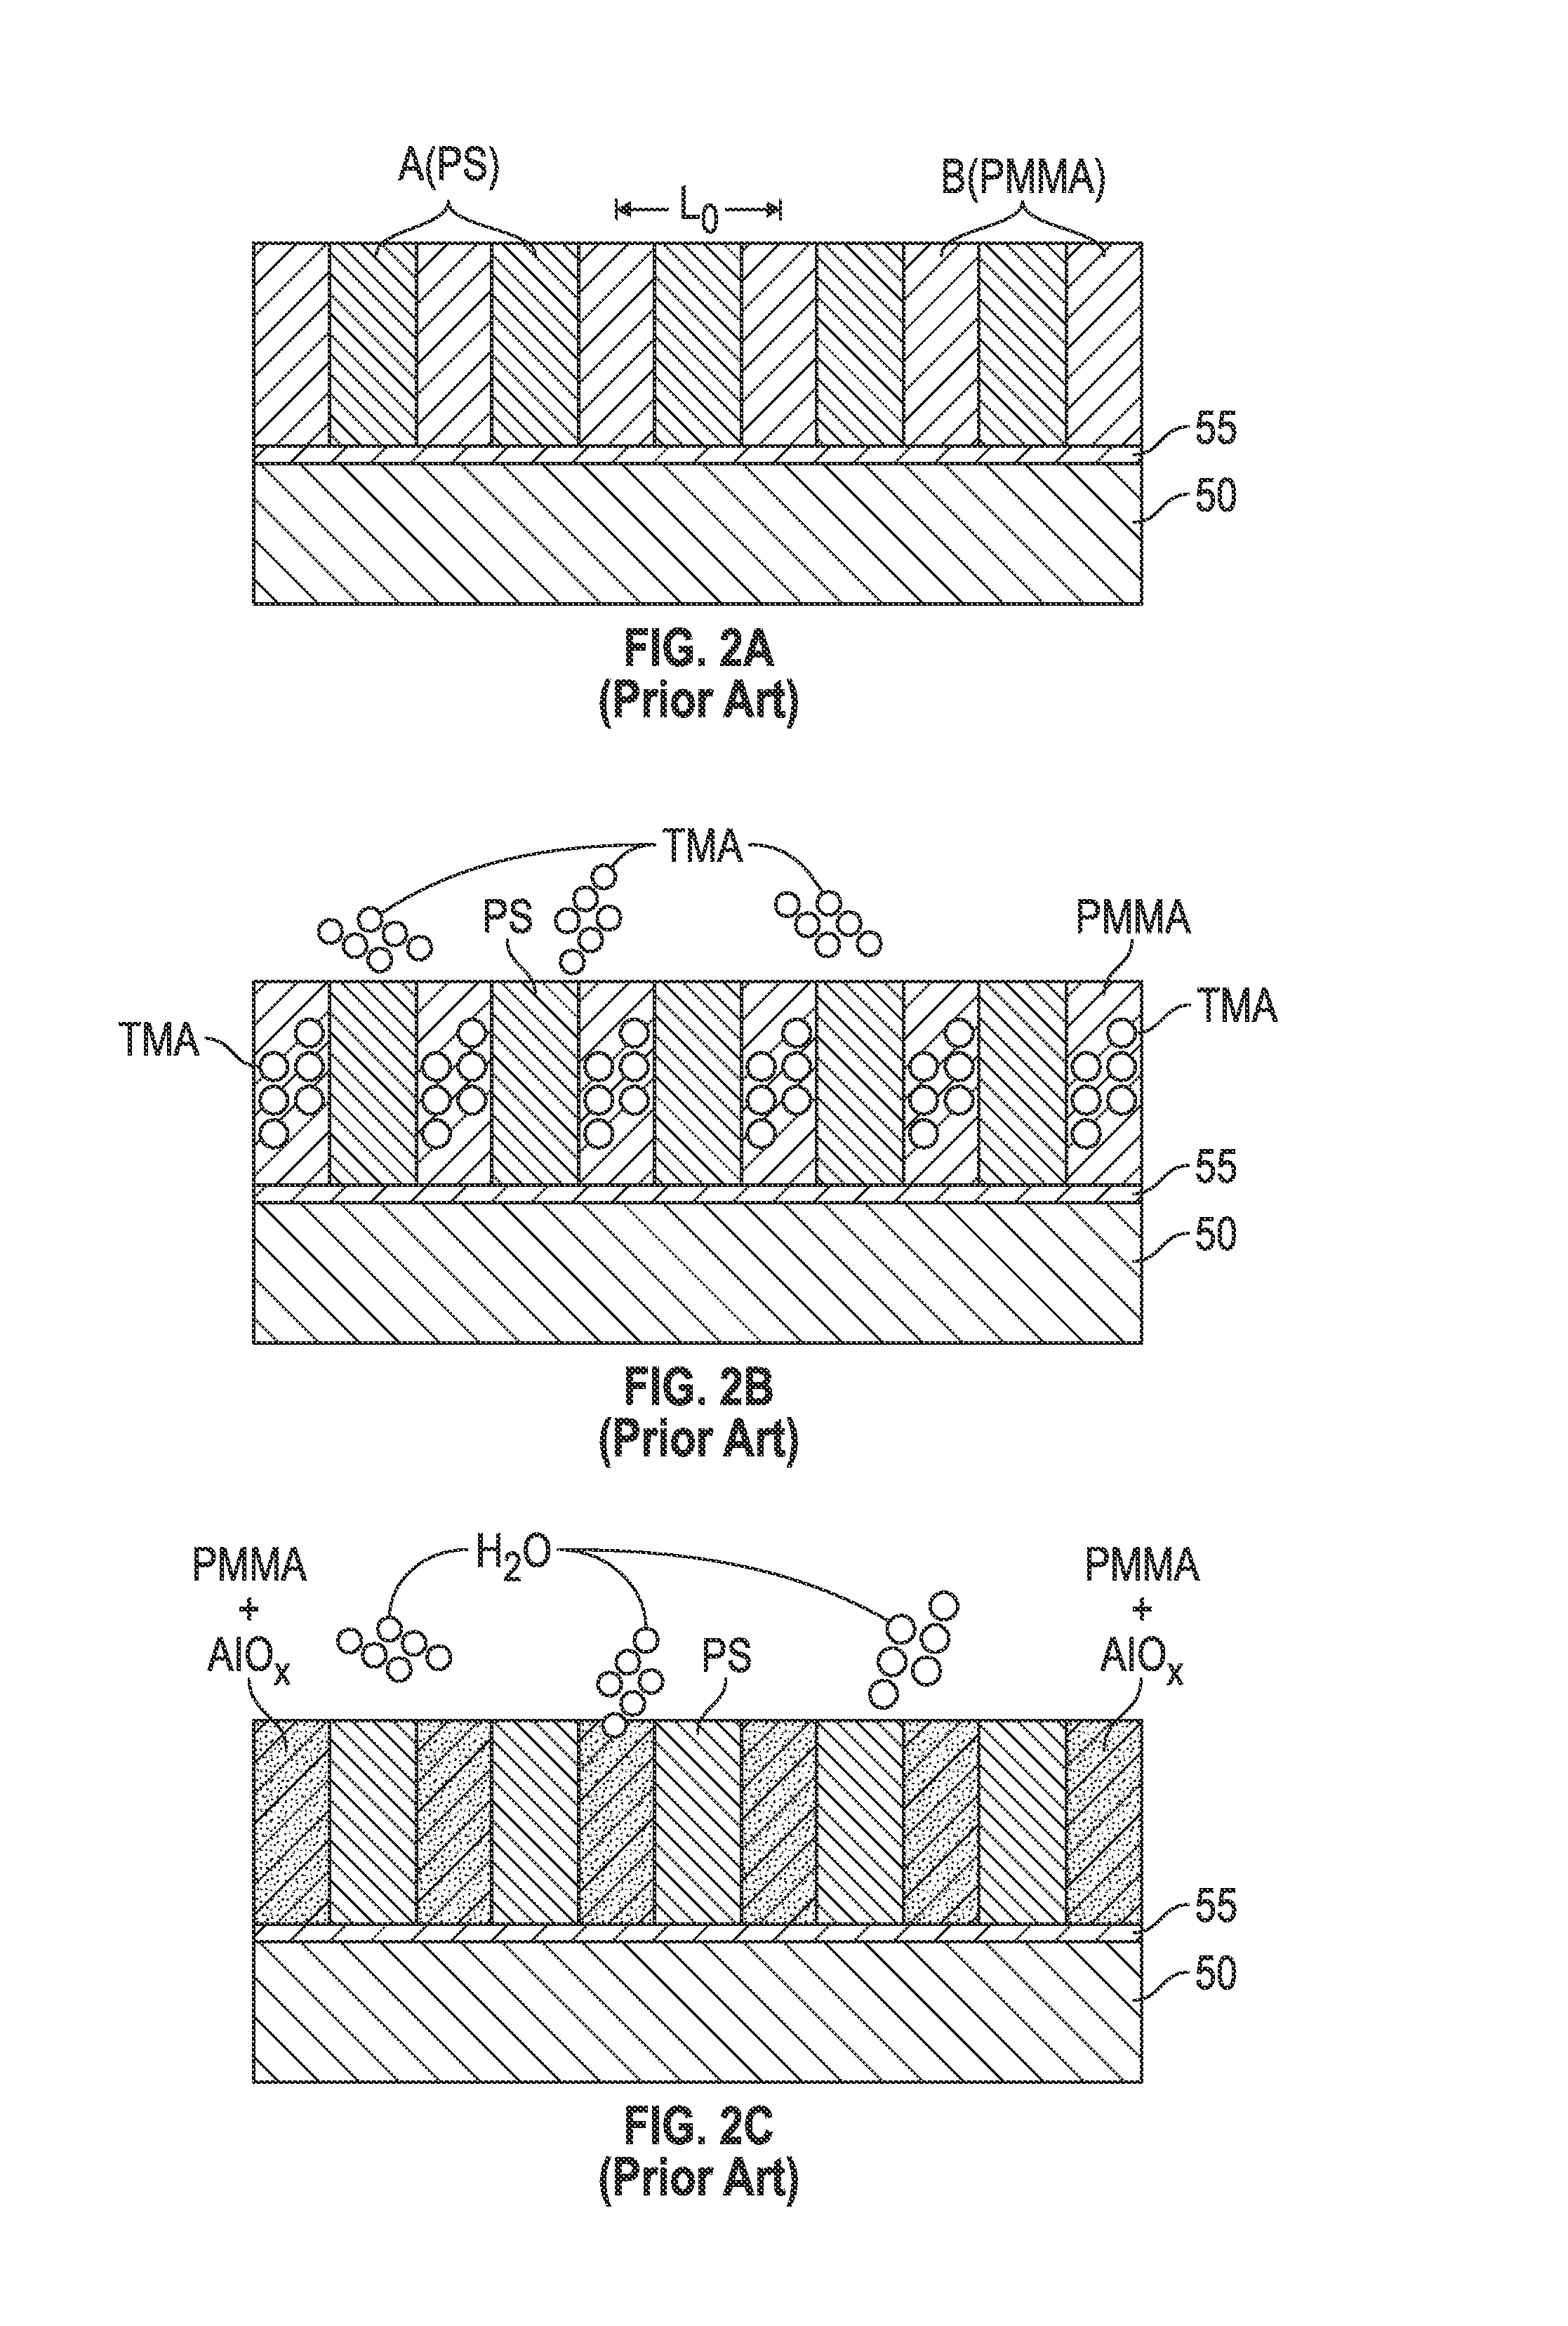 Method for line density multiplication using block copolymers and sequential infiltration synthesis